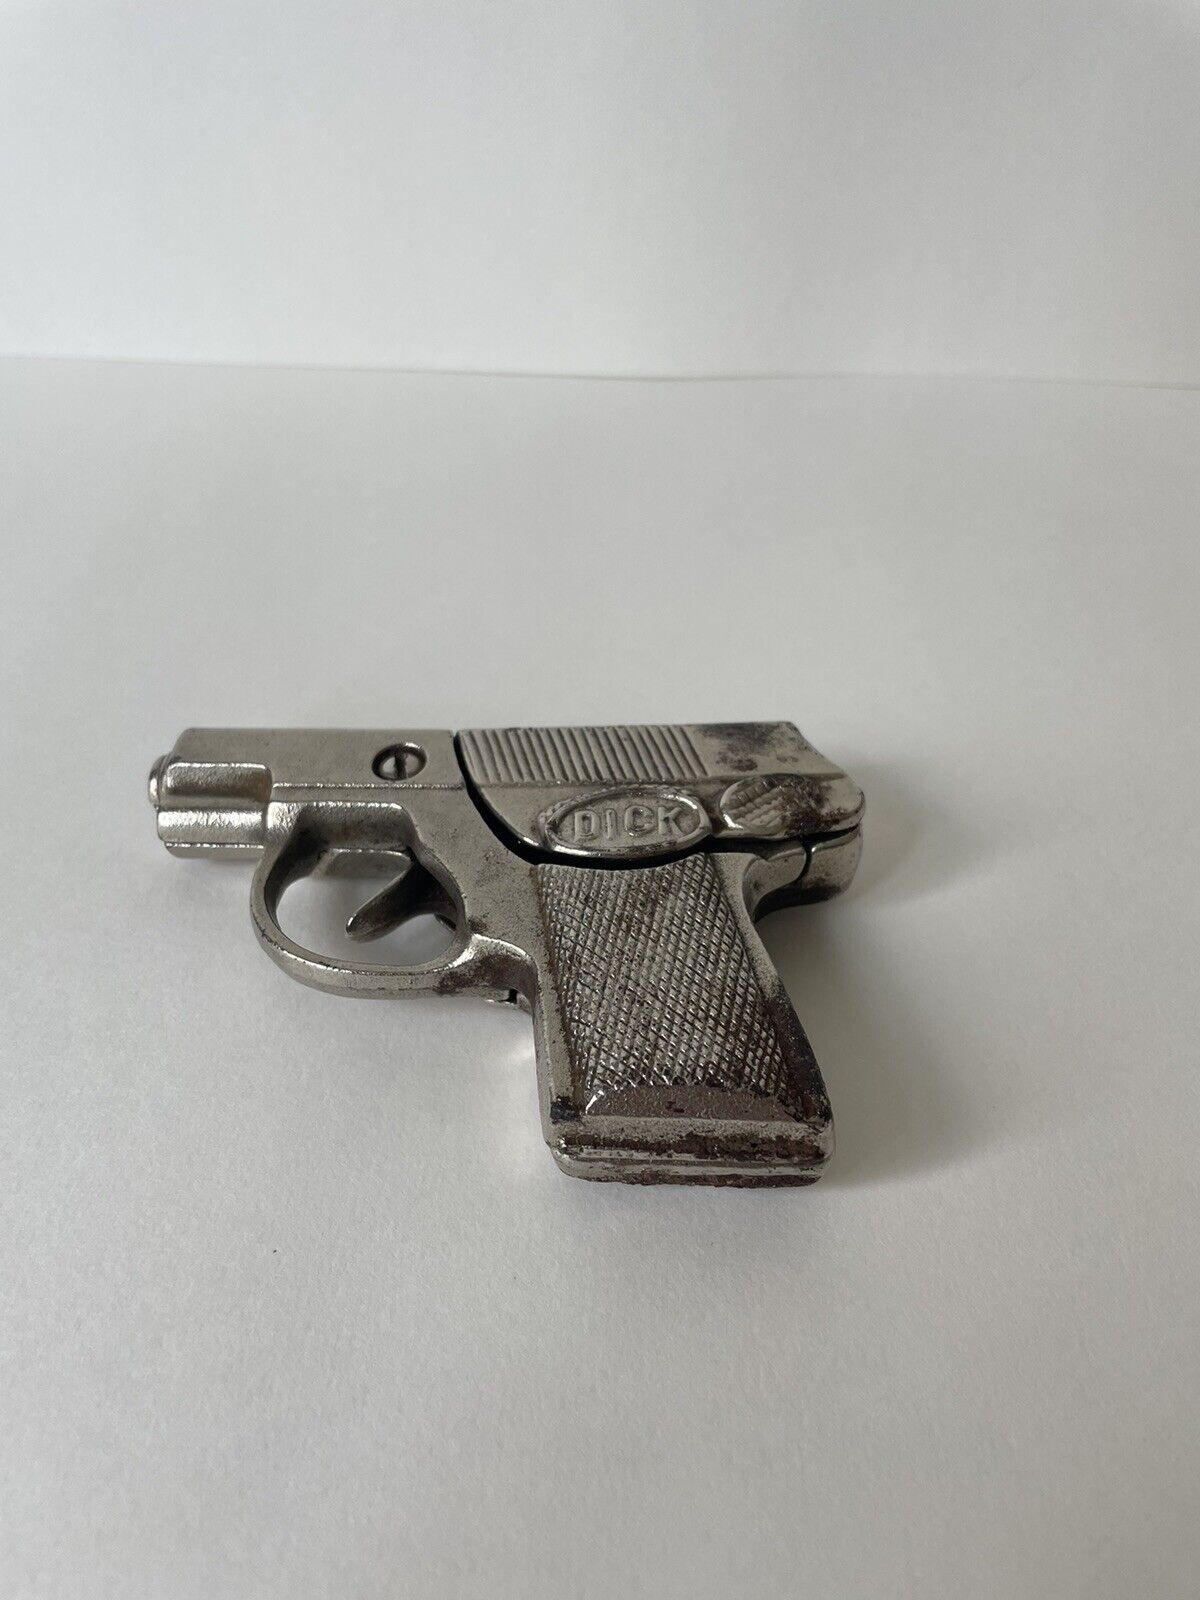 Vintage HUBLEY DICK TRACY Metal Toy Pistol Cap Gun Made In USA- Fully Functional